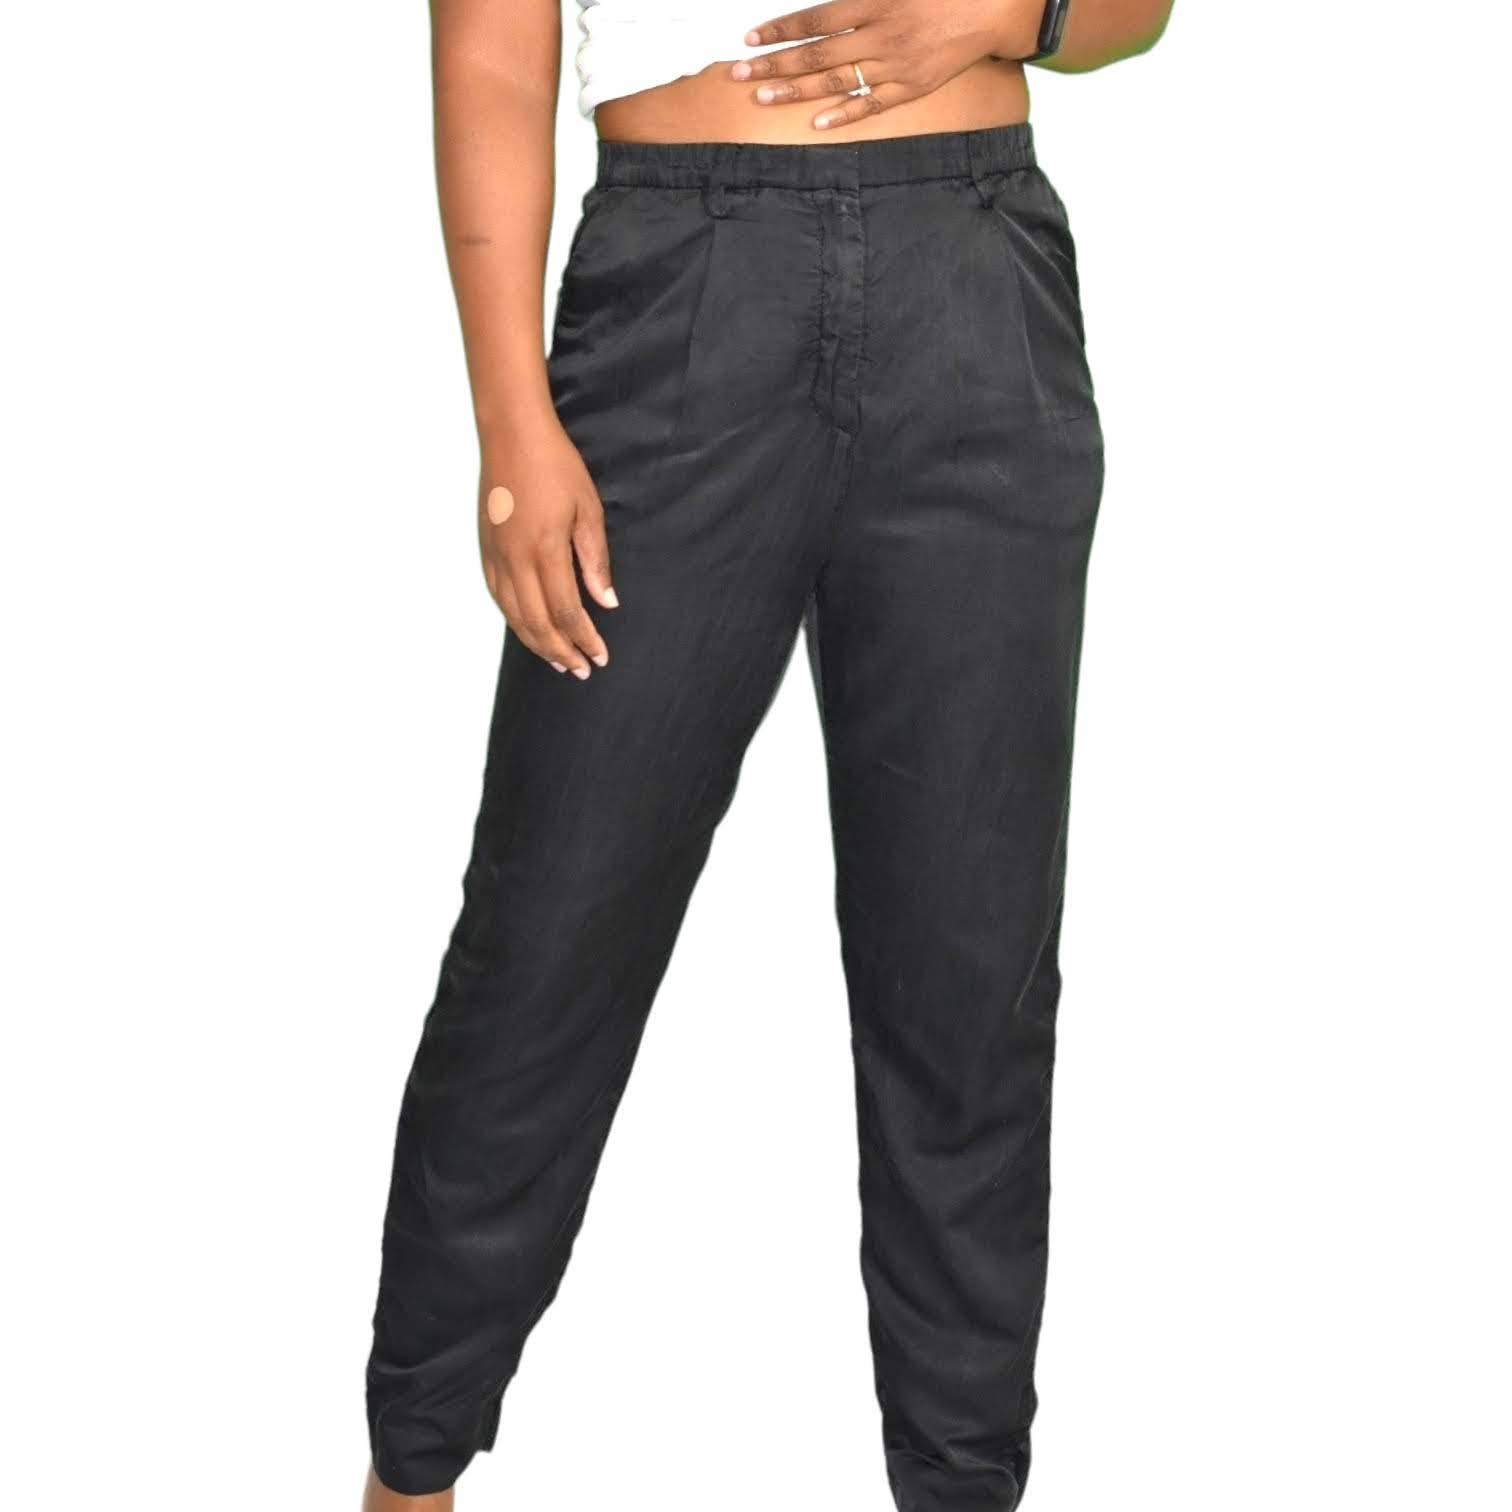 Acne Play Pants Black High Rise Trousers Dress Straight Leg Pleated Size 34 2 XS